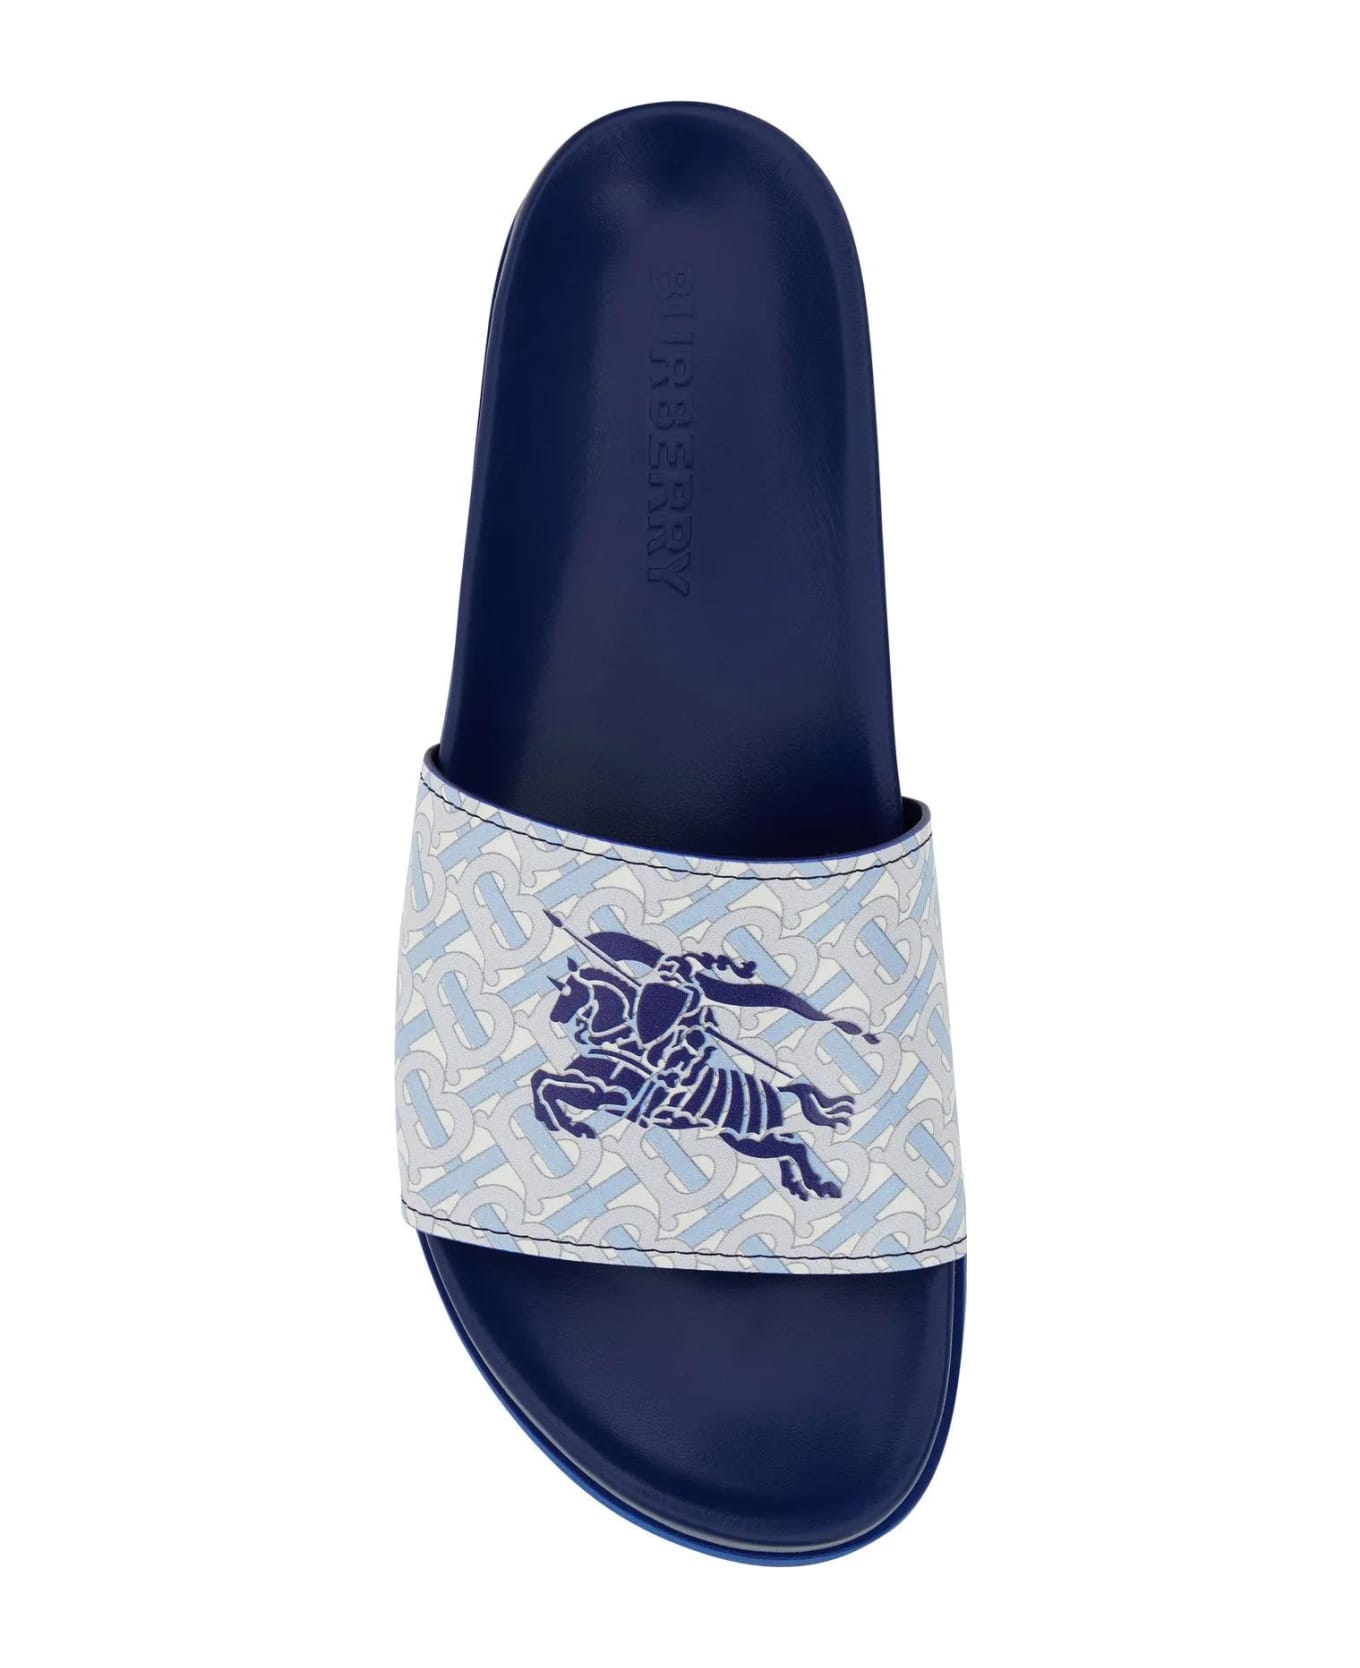 Burberry Printed Leather Slippers - Blue